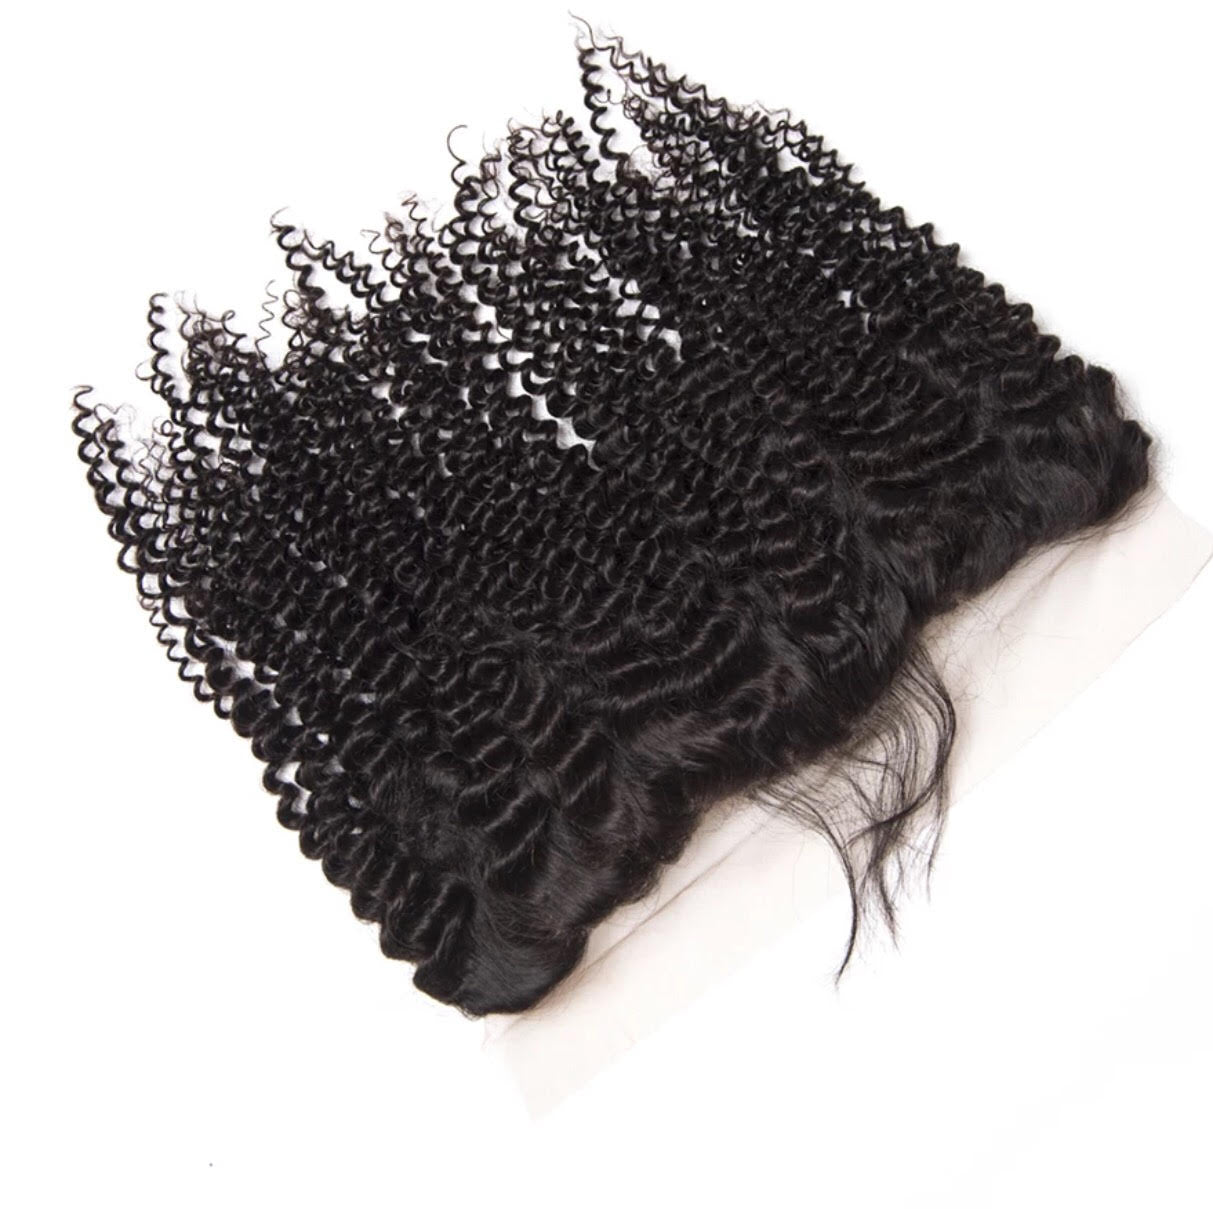 Frontals - Tropical, Kinky Curly and Kinky Straight